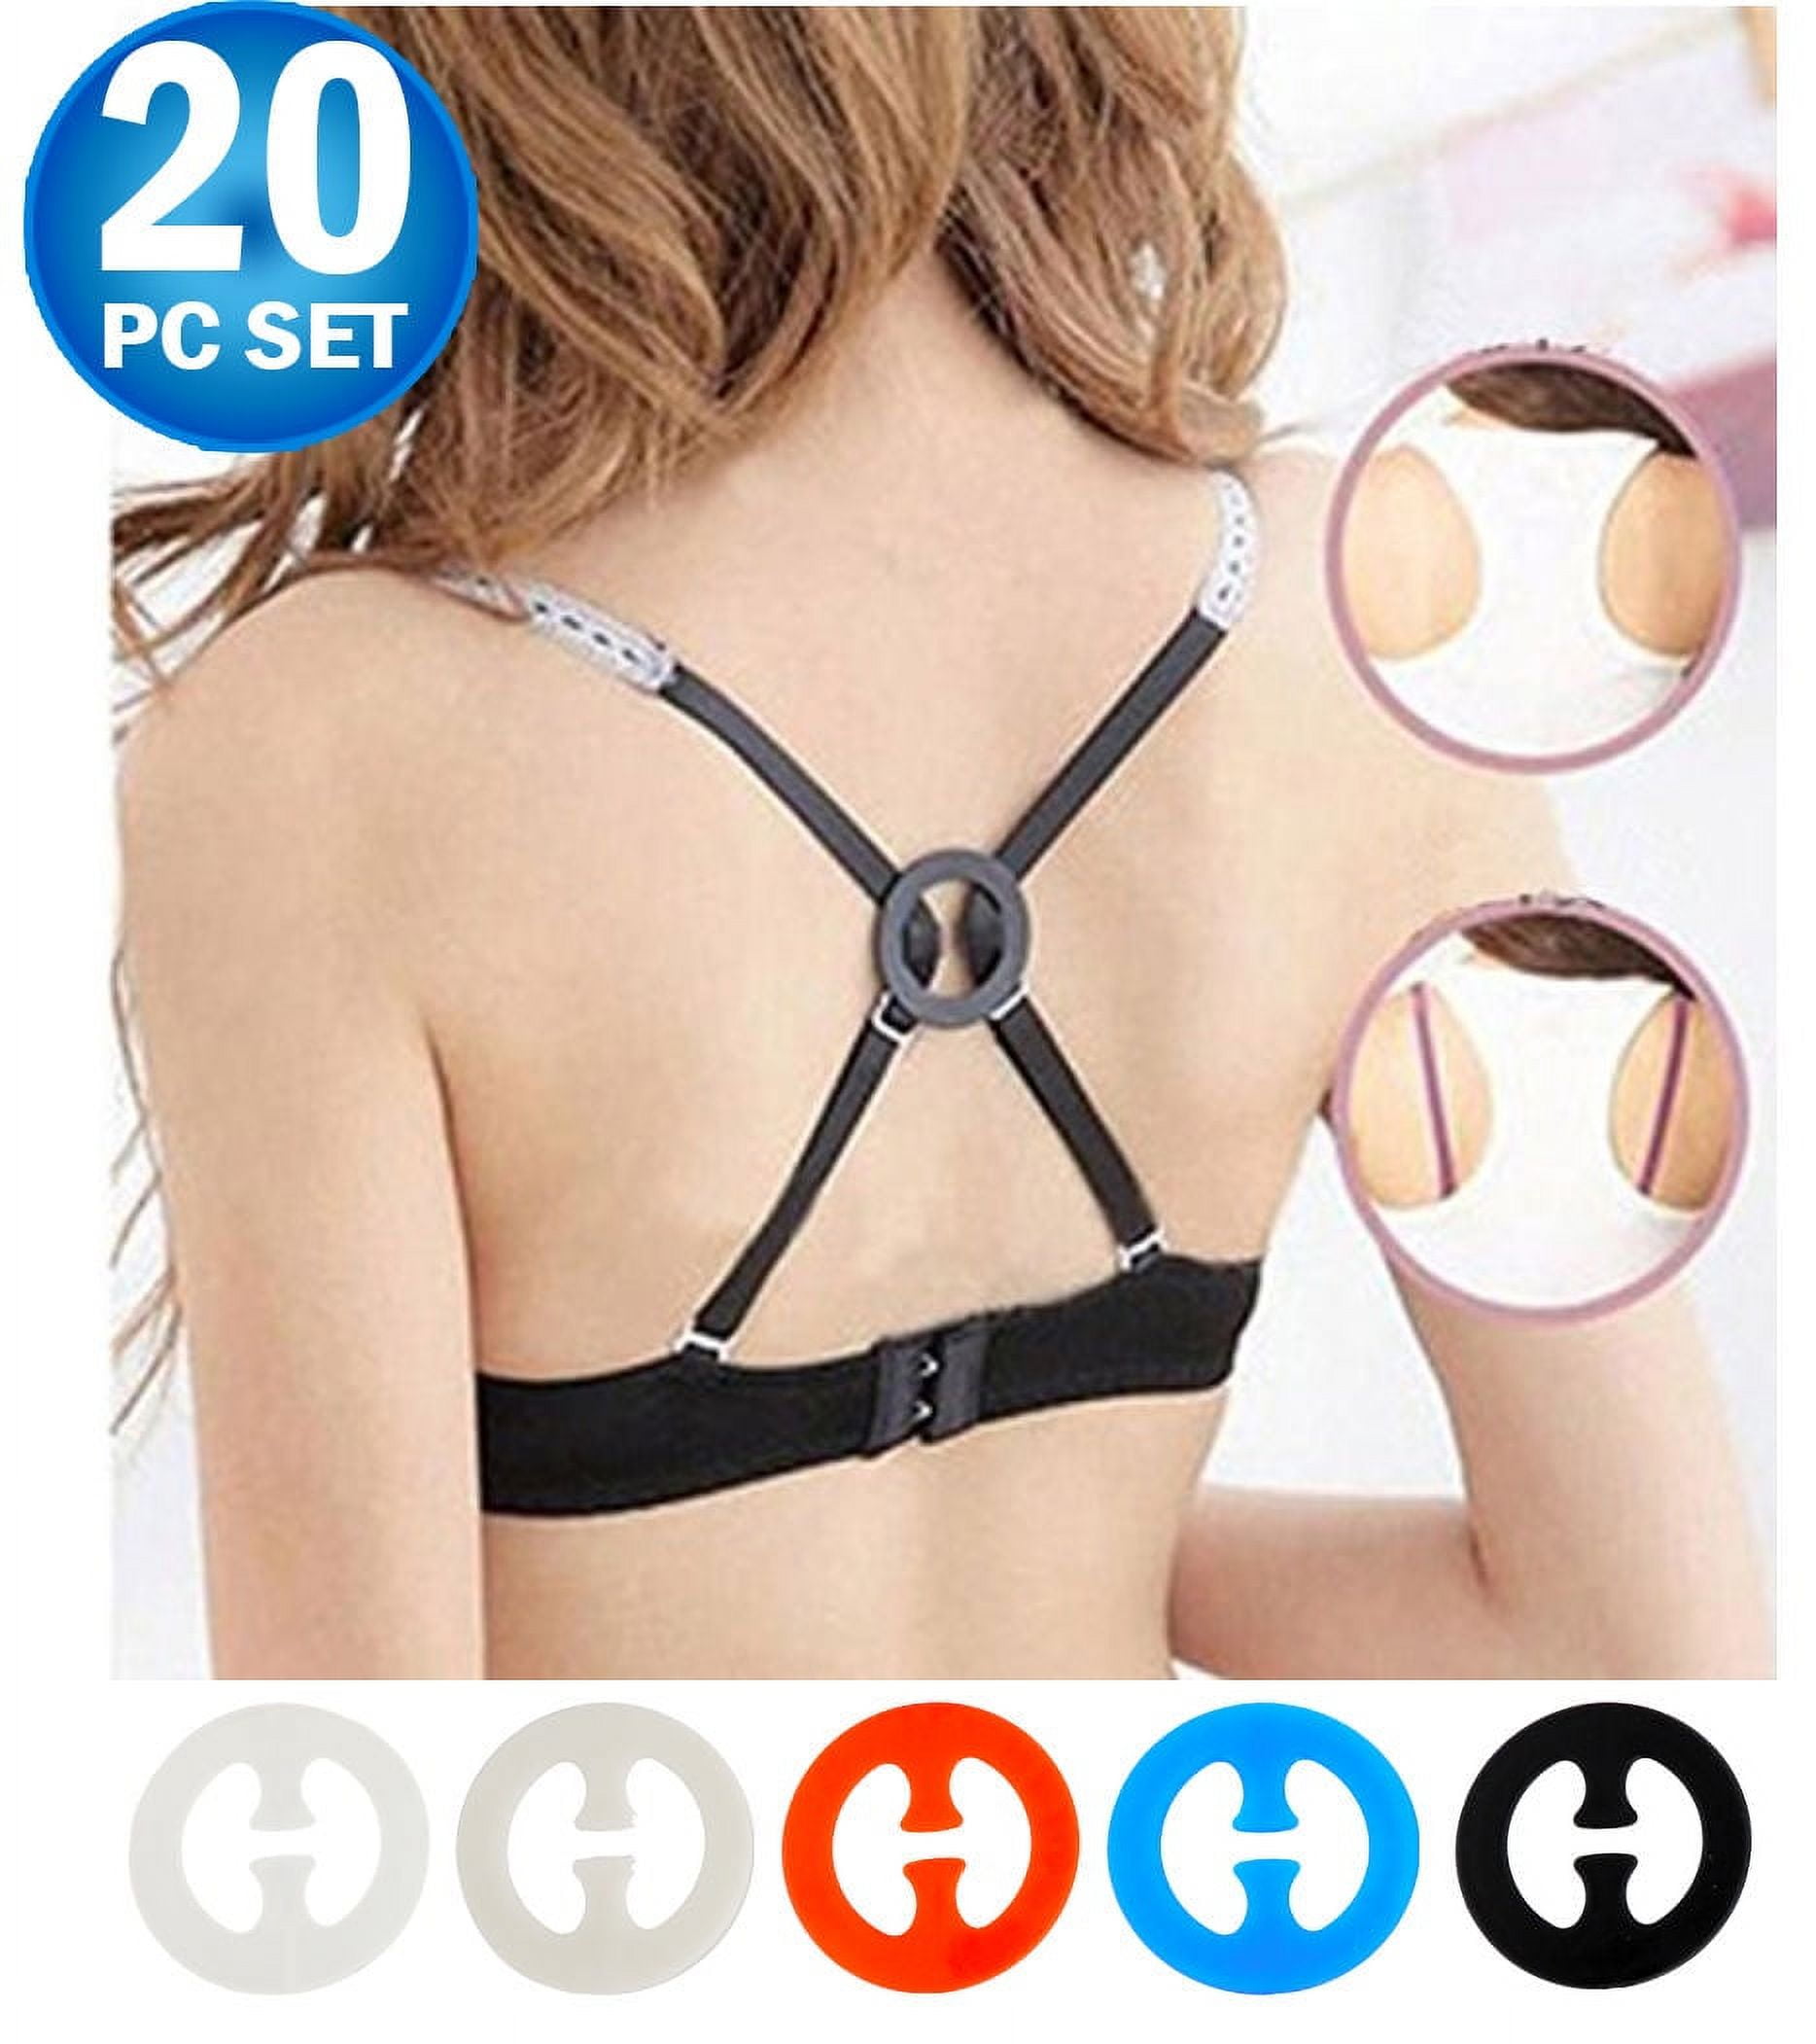 Bra Strap Clips For Back - Conceal Bra Straps, Bra Strap Holder, Cleavage  Control - Racerback Bra Clips Add Full Cup Size (15pc)